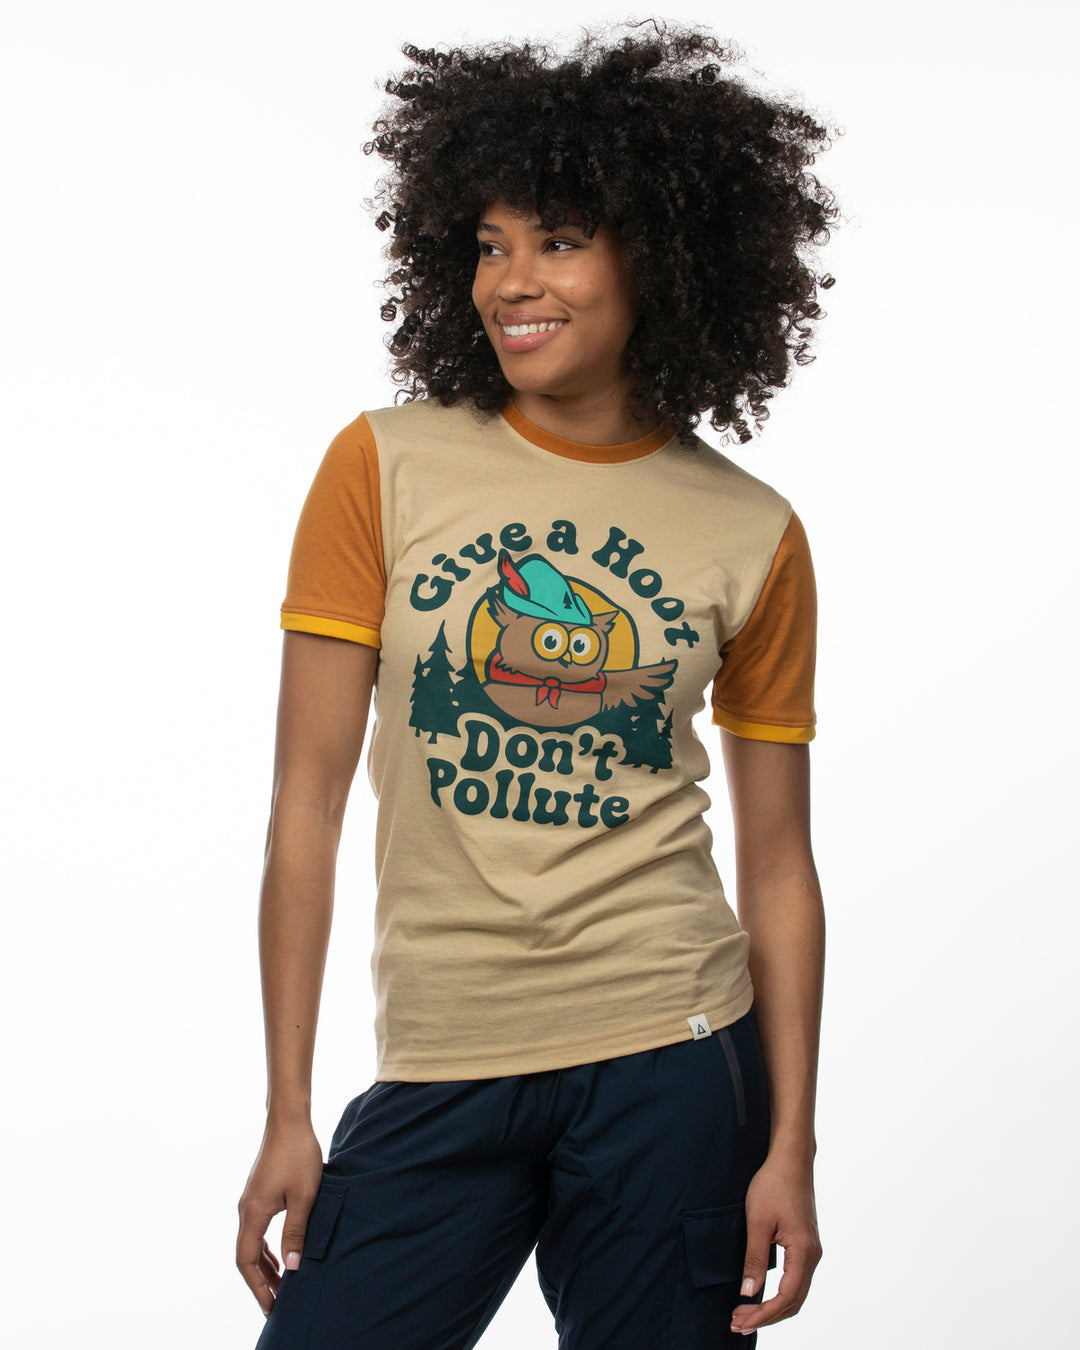 Give A Hoot Unisex Short Sleeve Colorblock Ringer Tee   